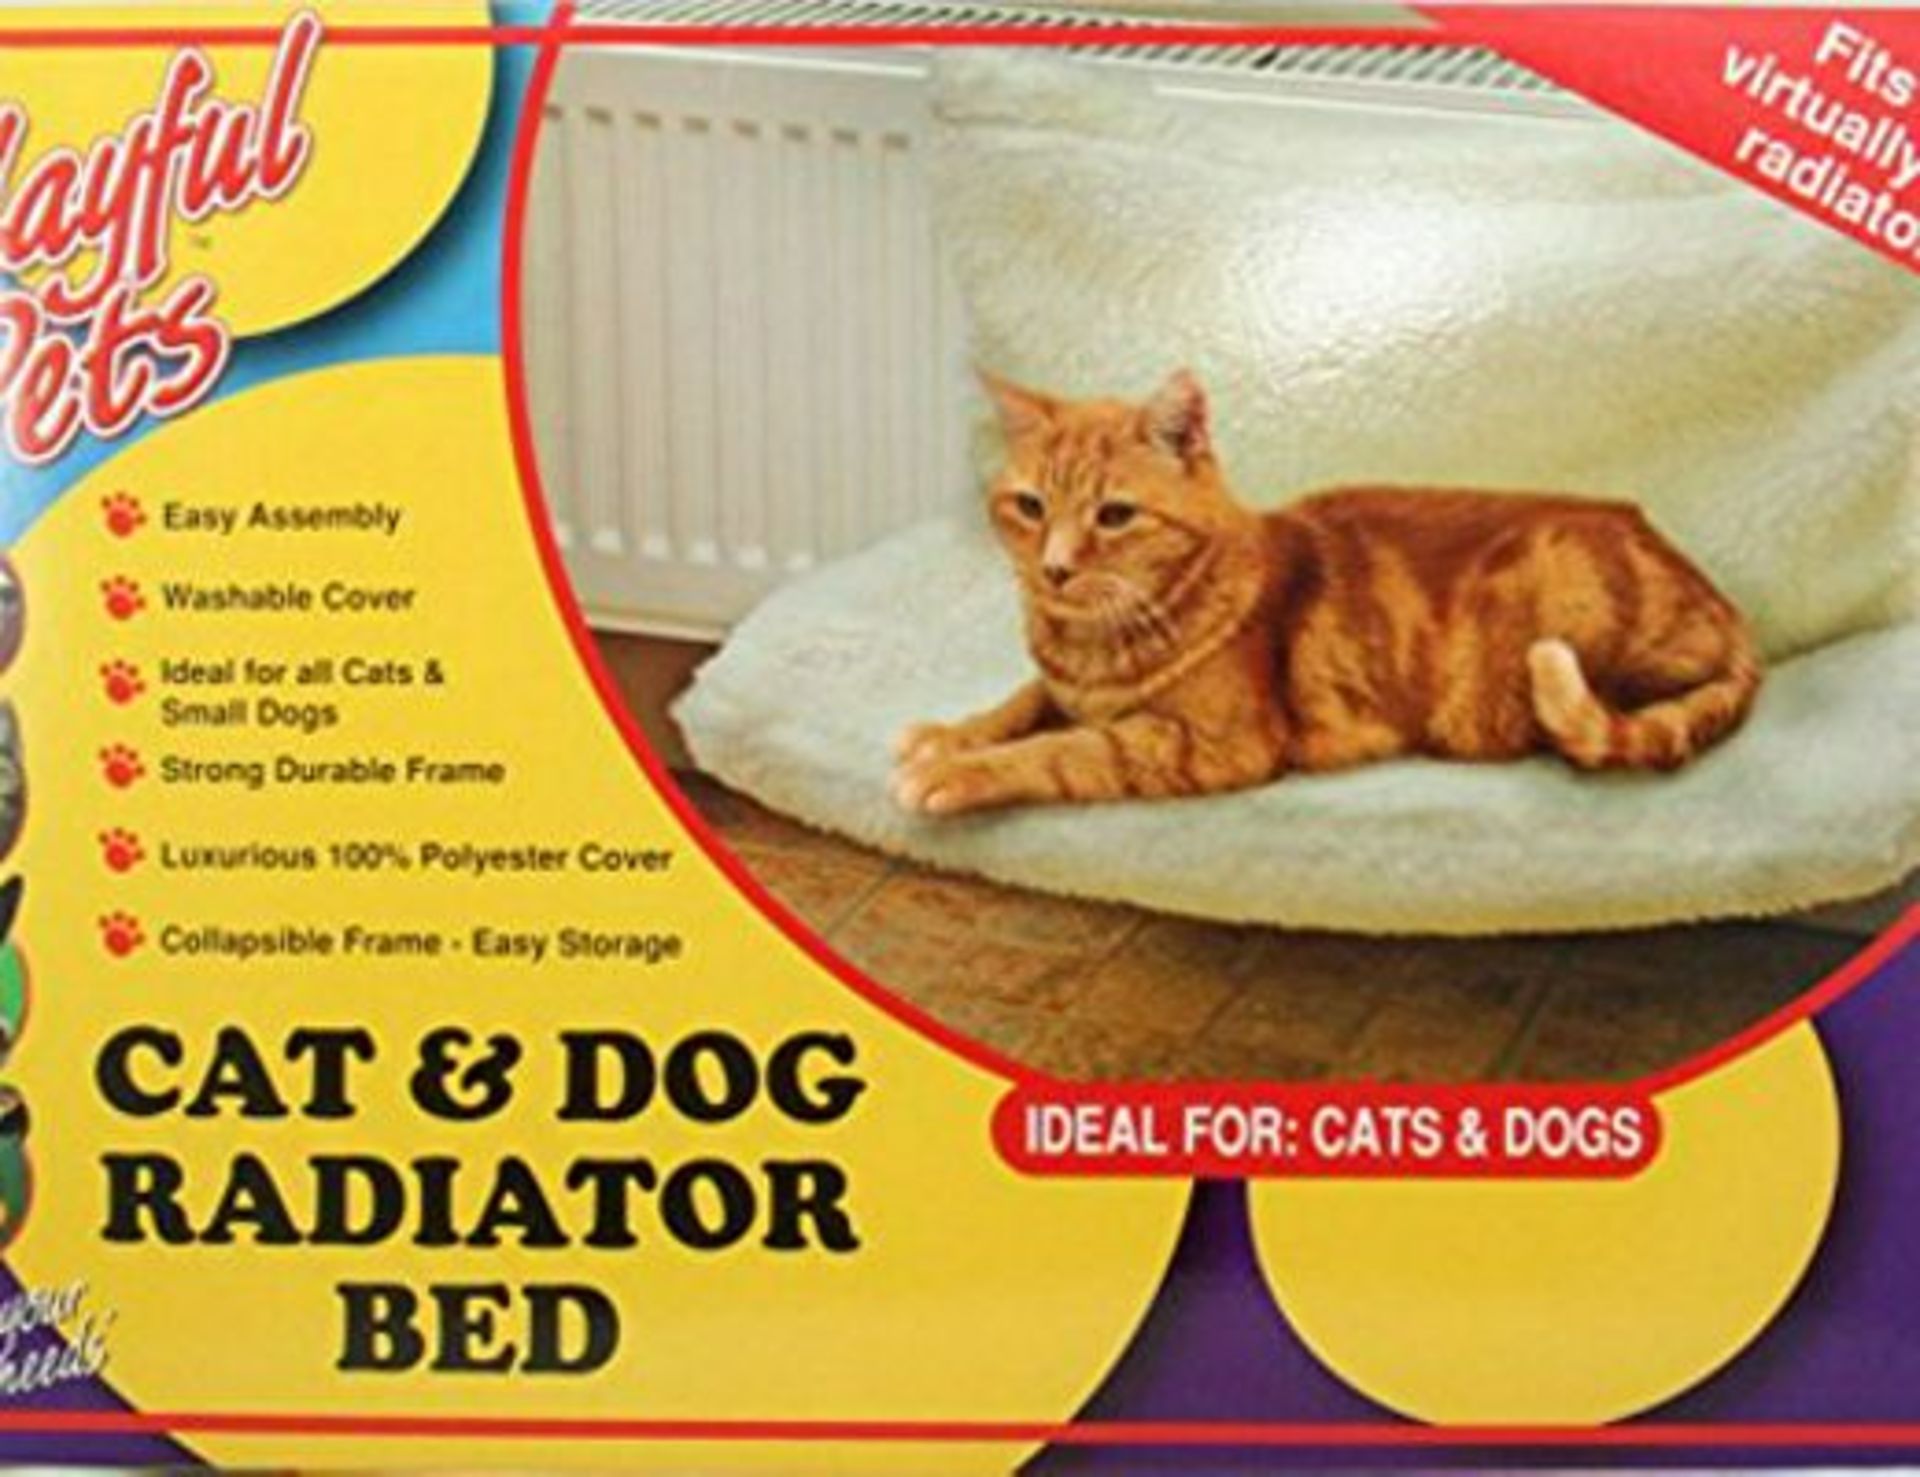 V Brand New Cat Or Dog Radiator Bed With Washable Cover & Strong Frame X 2 YOUR BID PRICE TO BE